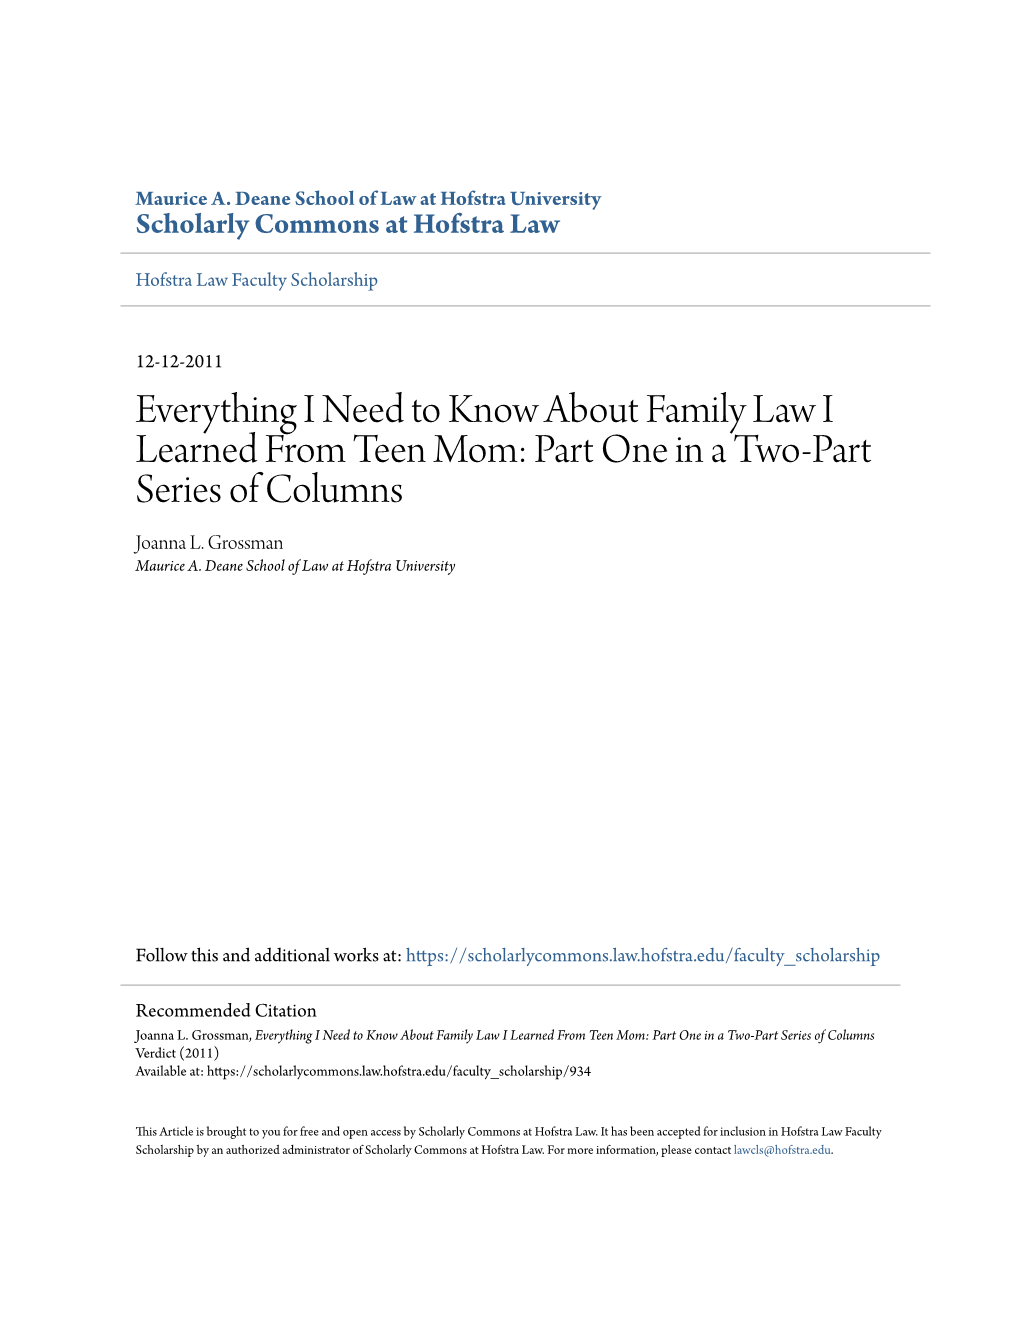 Everything I Need to Know About Family Law I Learned from Teen Mom: Part One in a Two-Part Series of Columns Joanna L